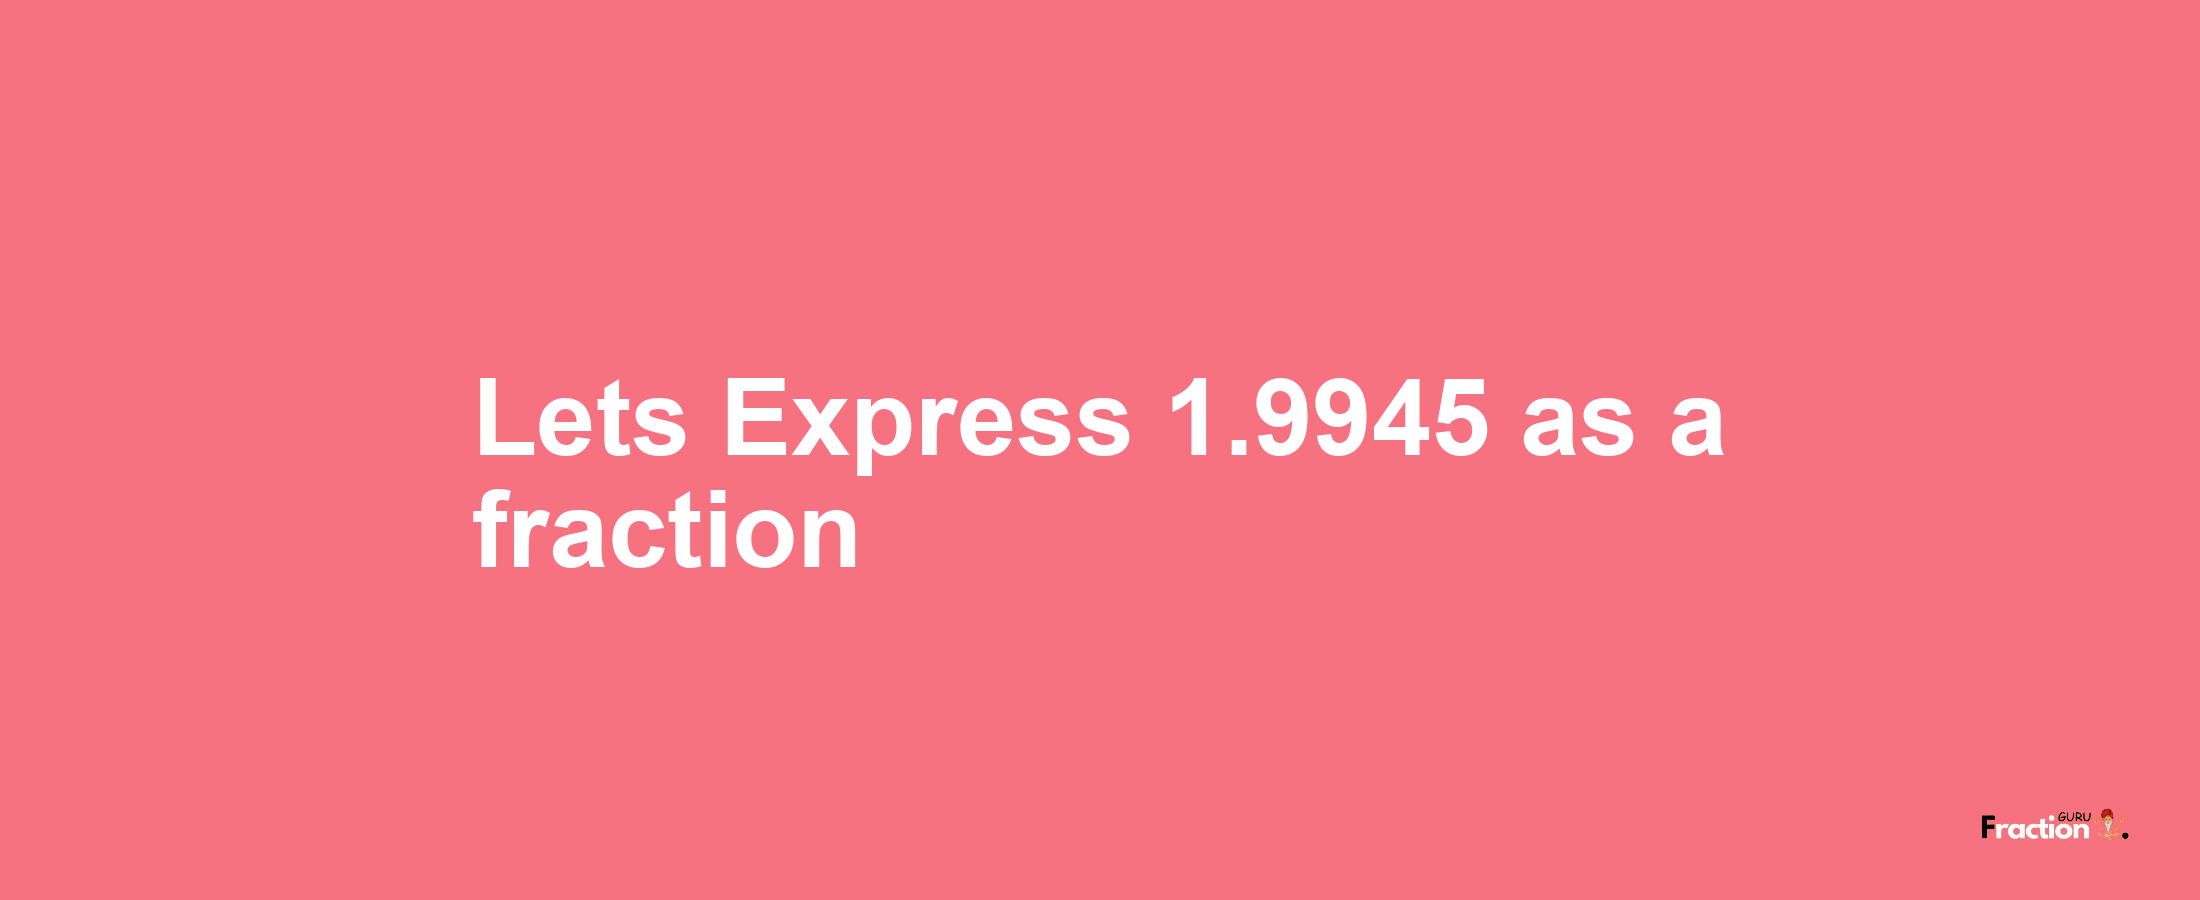 Lets Express 1.9945 as afraction